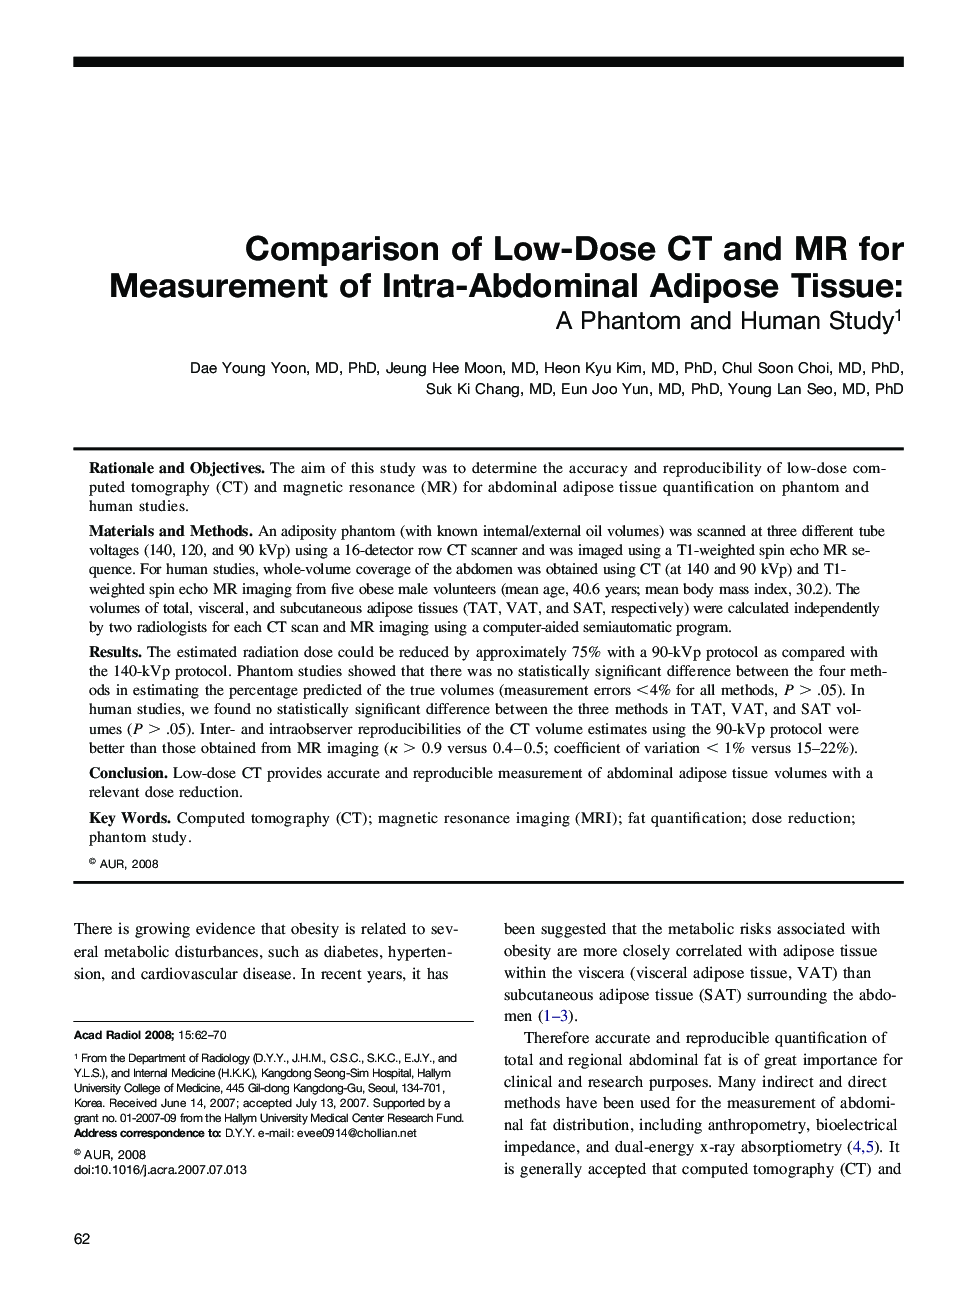 Comparison of Low-Dose CT and MR for Measurement of Intra-Abdominal Adipose Tissue